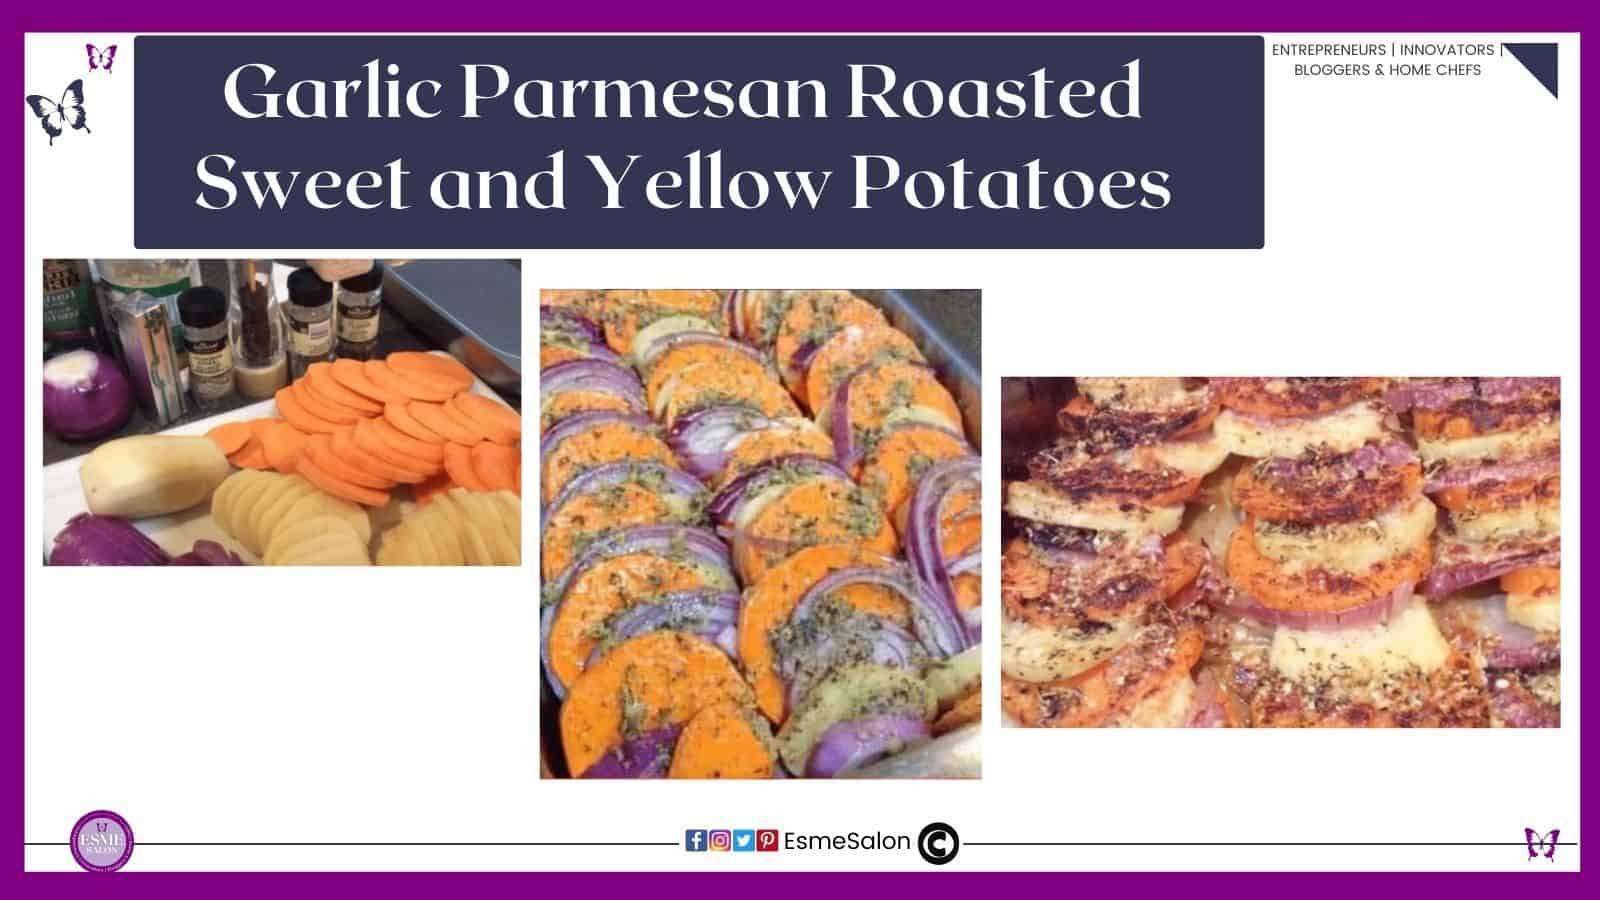 an image of sliced Garlic Parmesan Roasted Sweet and Yellow Potatoes raw as well as prepared with the sauce to be baked